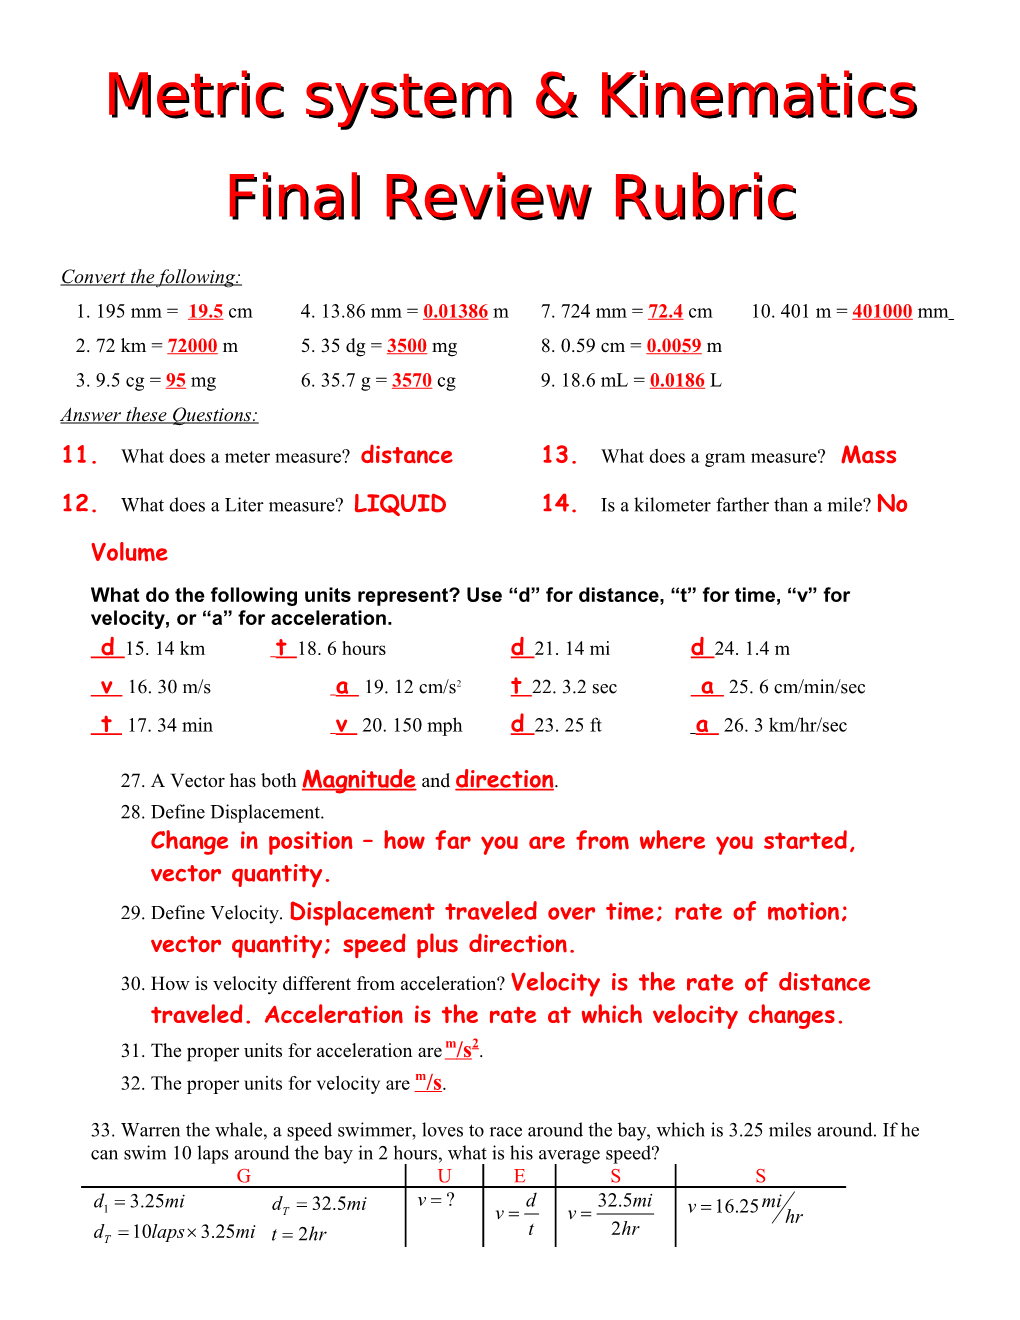 Metric System & Kinematics Final Review